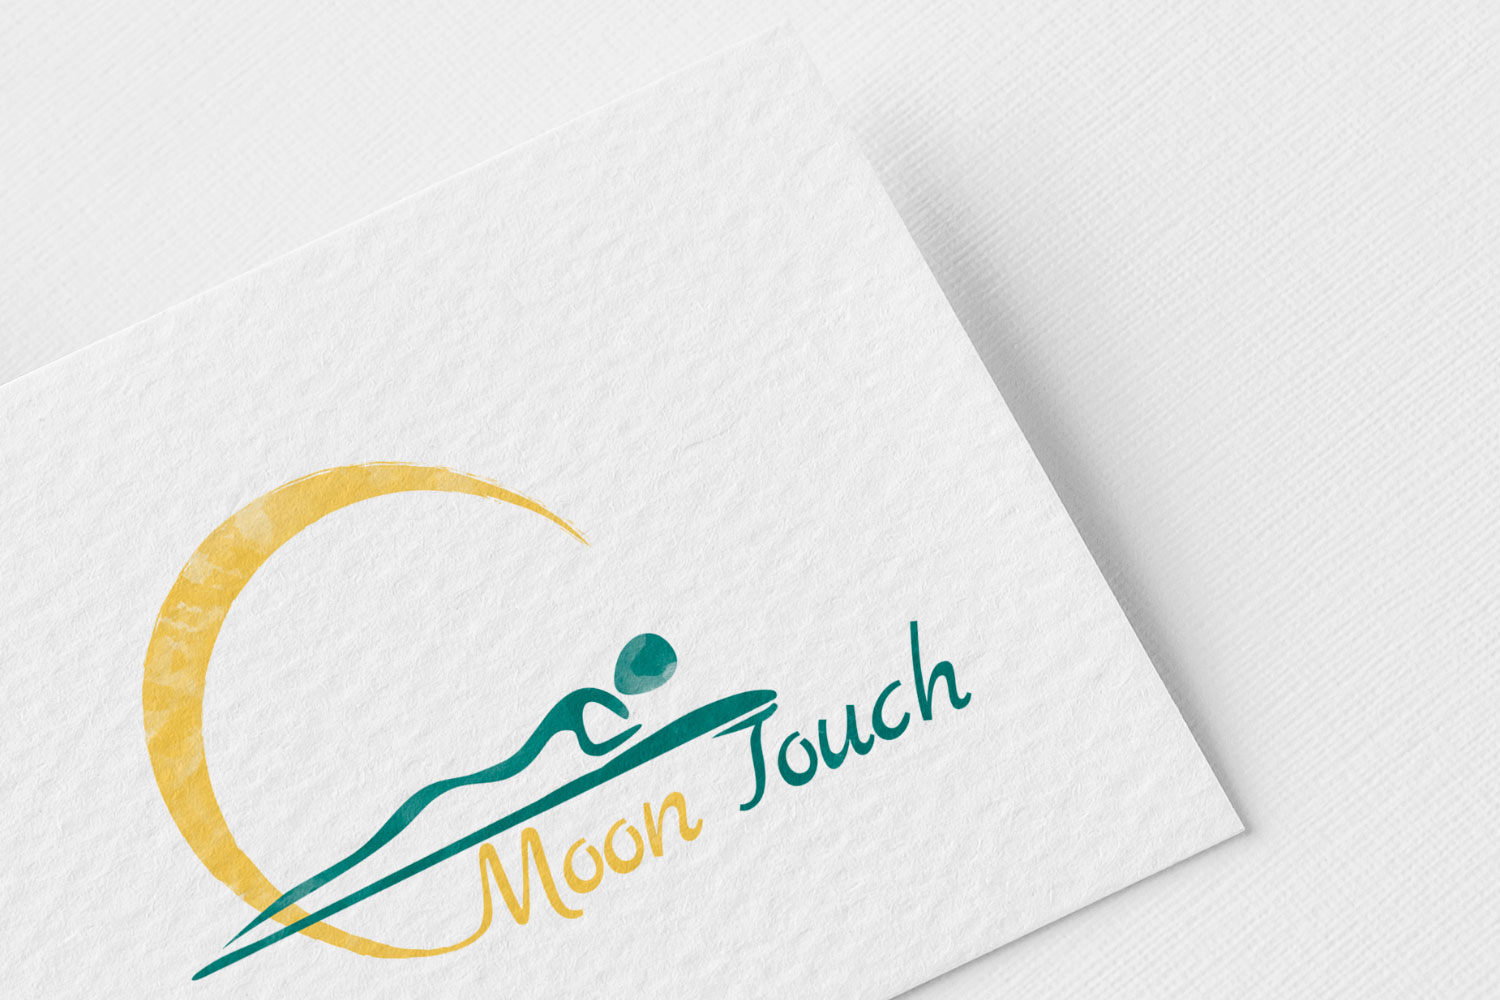 Moon Touch logo